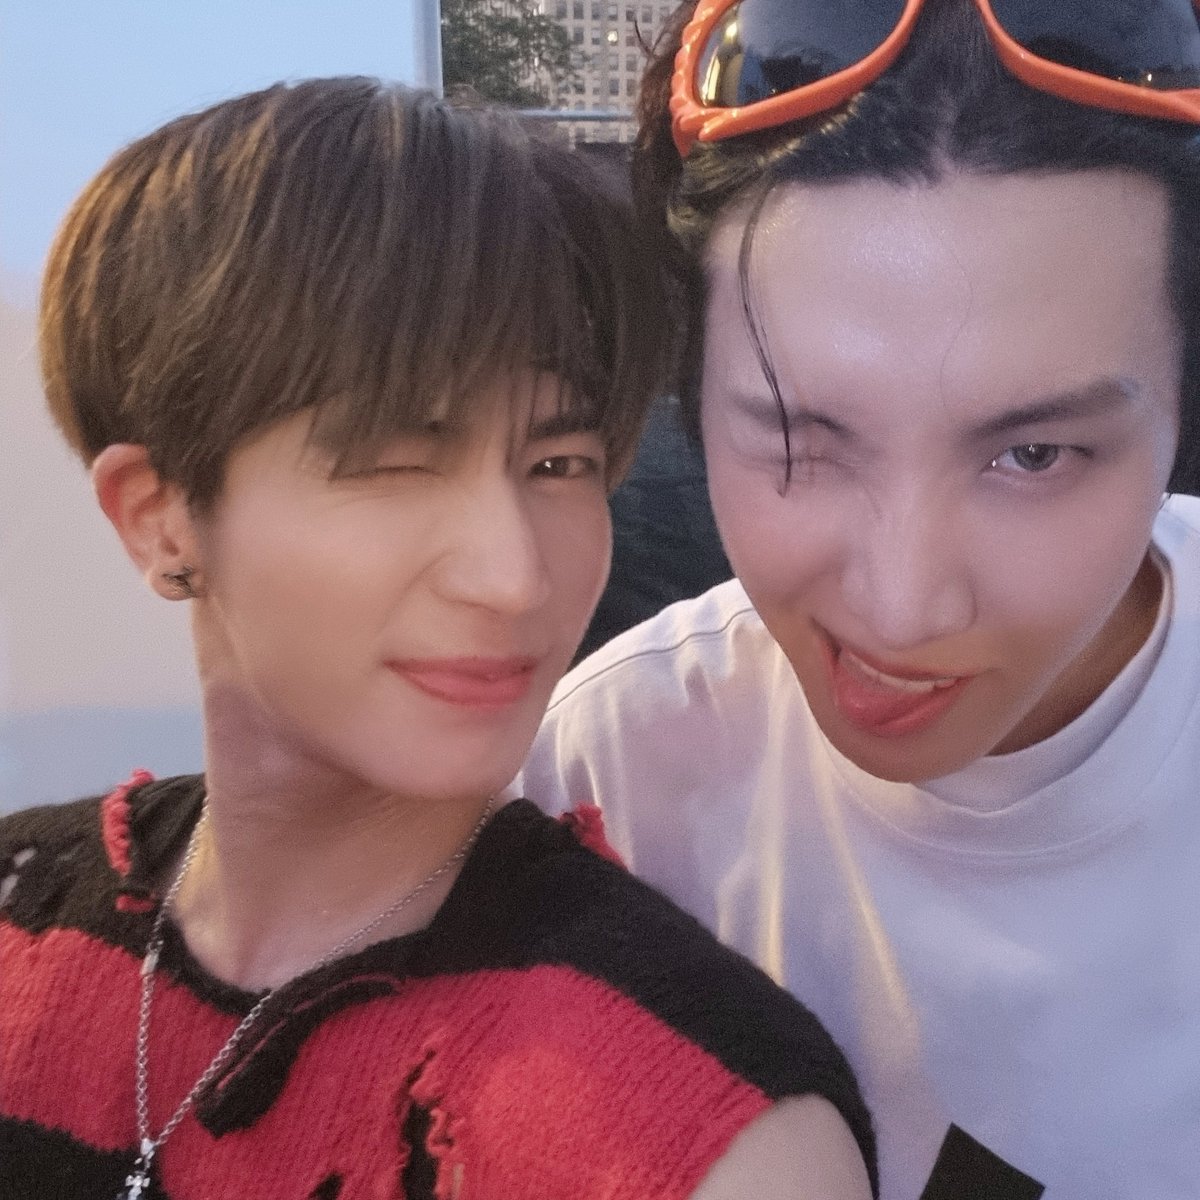 with most cool guy in the world
#JHOPE #TAEHYUN #제이홉 #태현